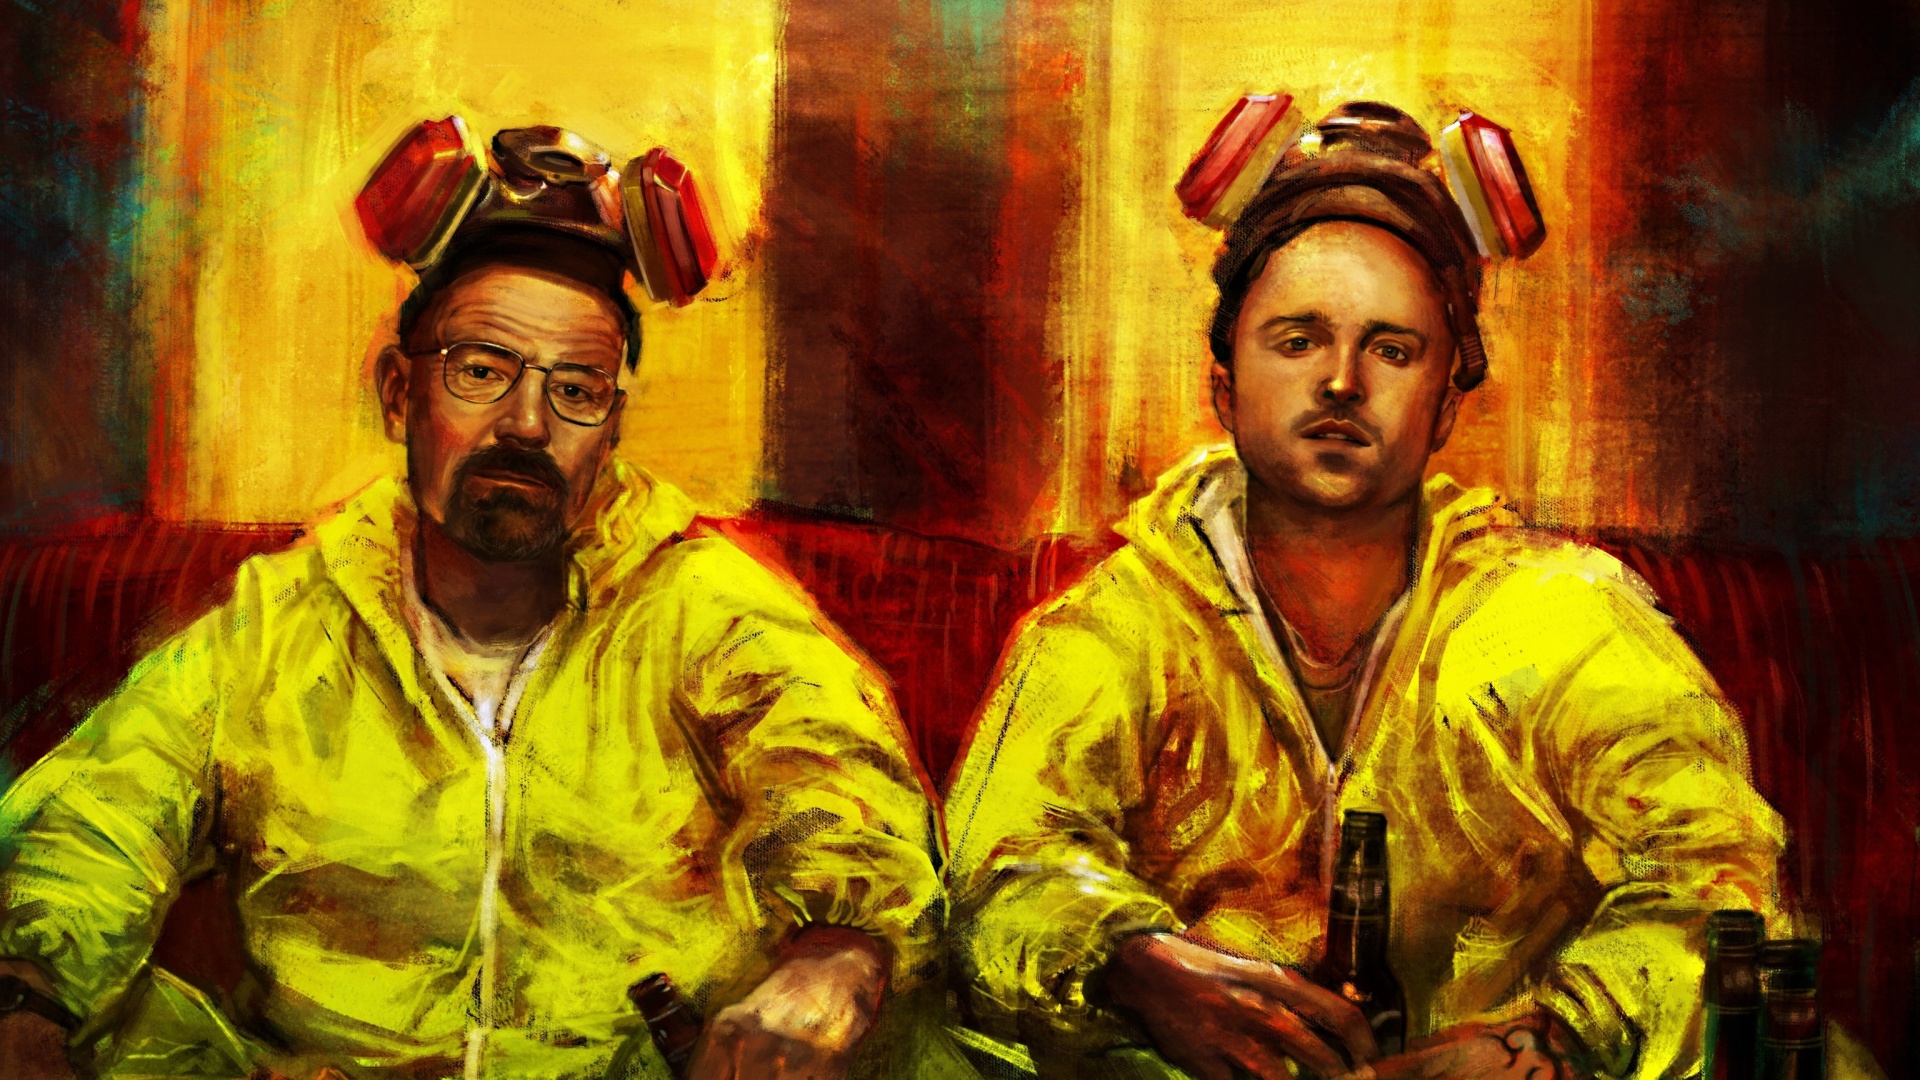 Breaking Bad with Walter White wallpaper 1920x1080